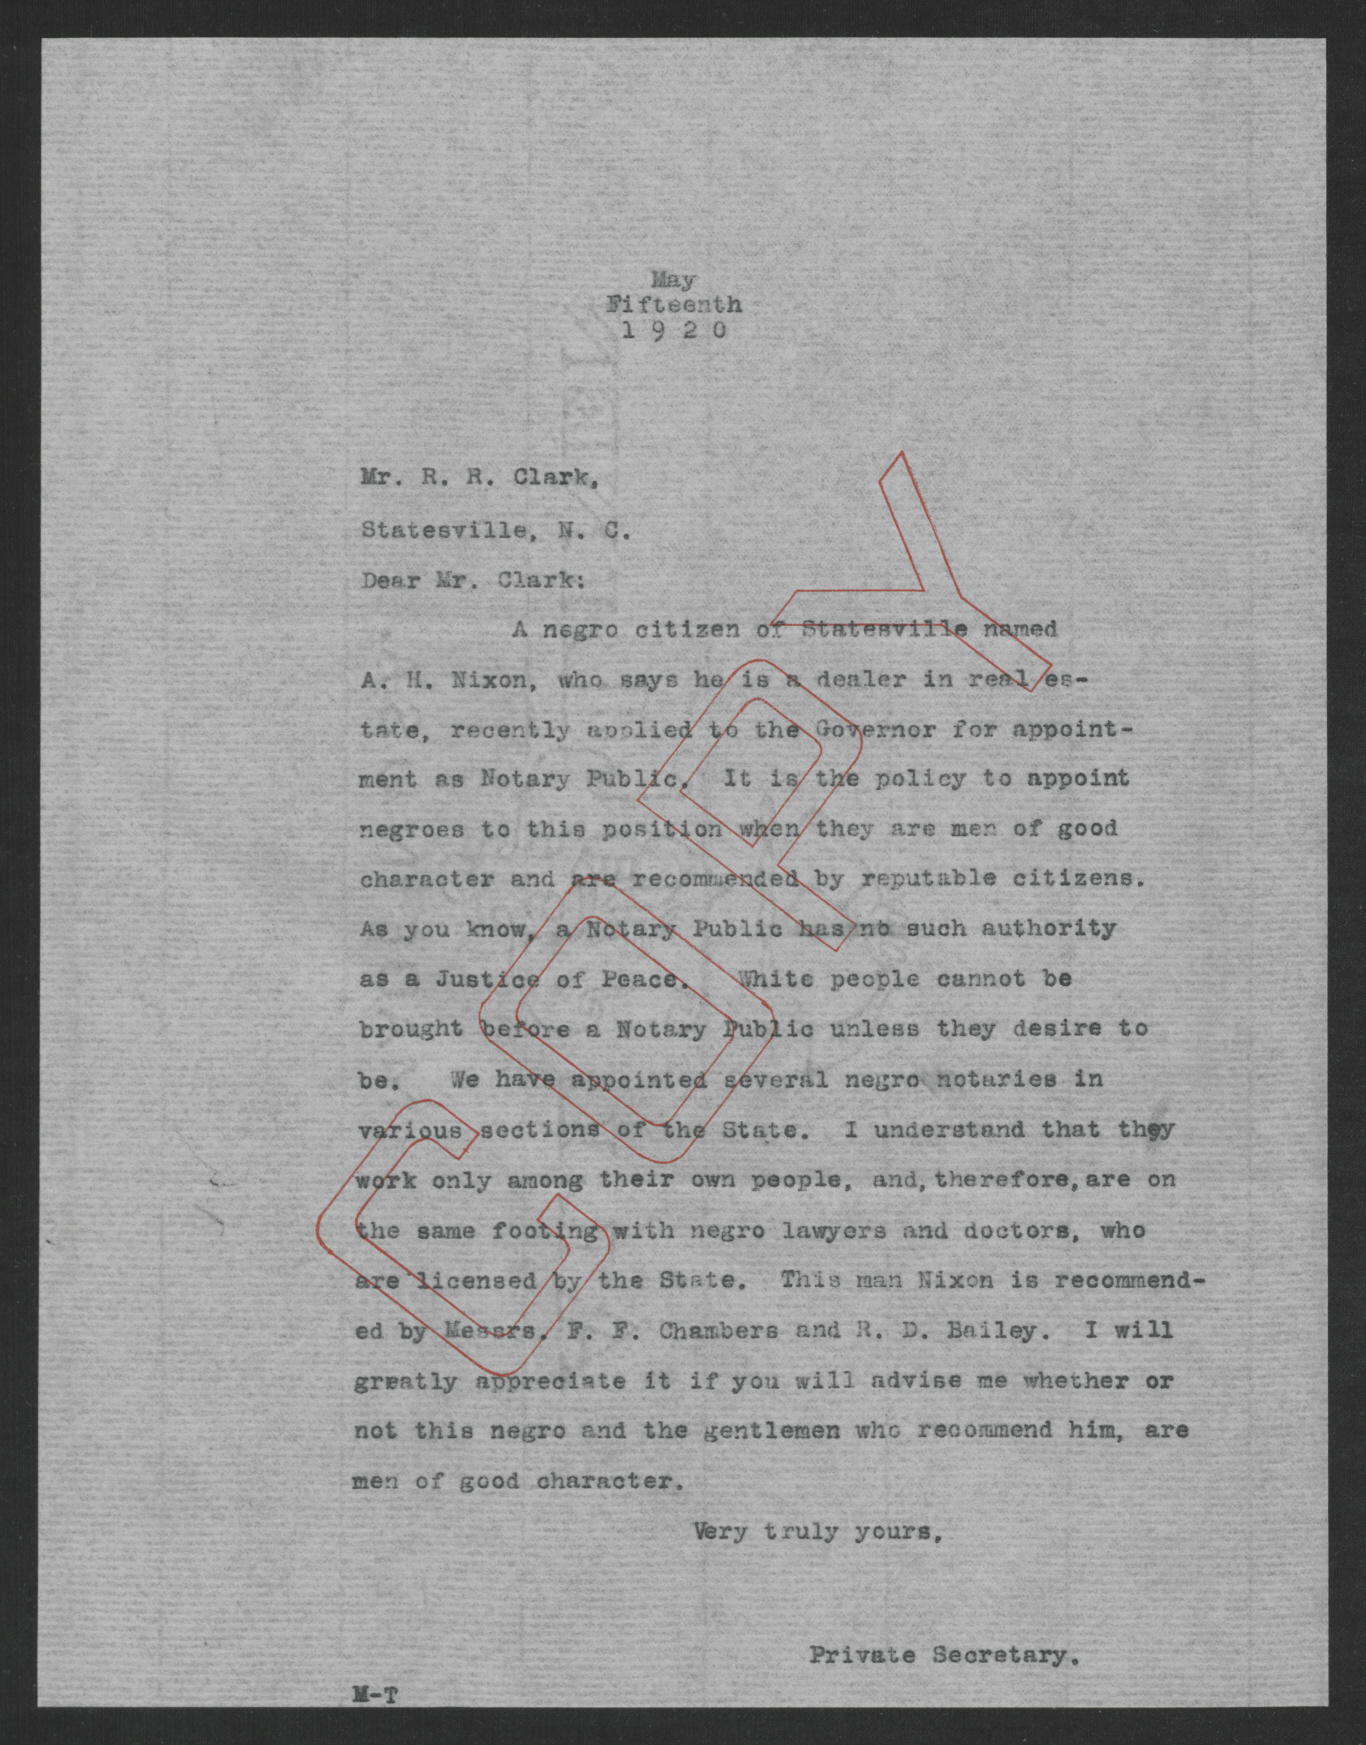 Letter from Santford Martin to R. R. Clark, May 15, 1920